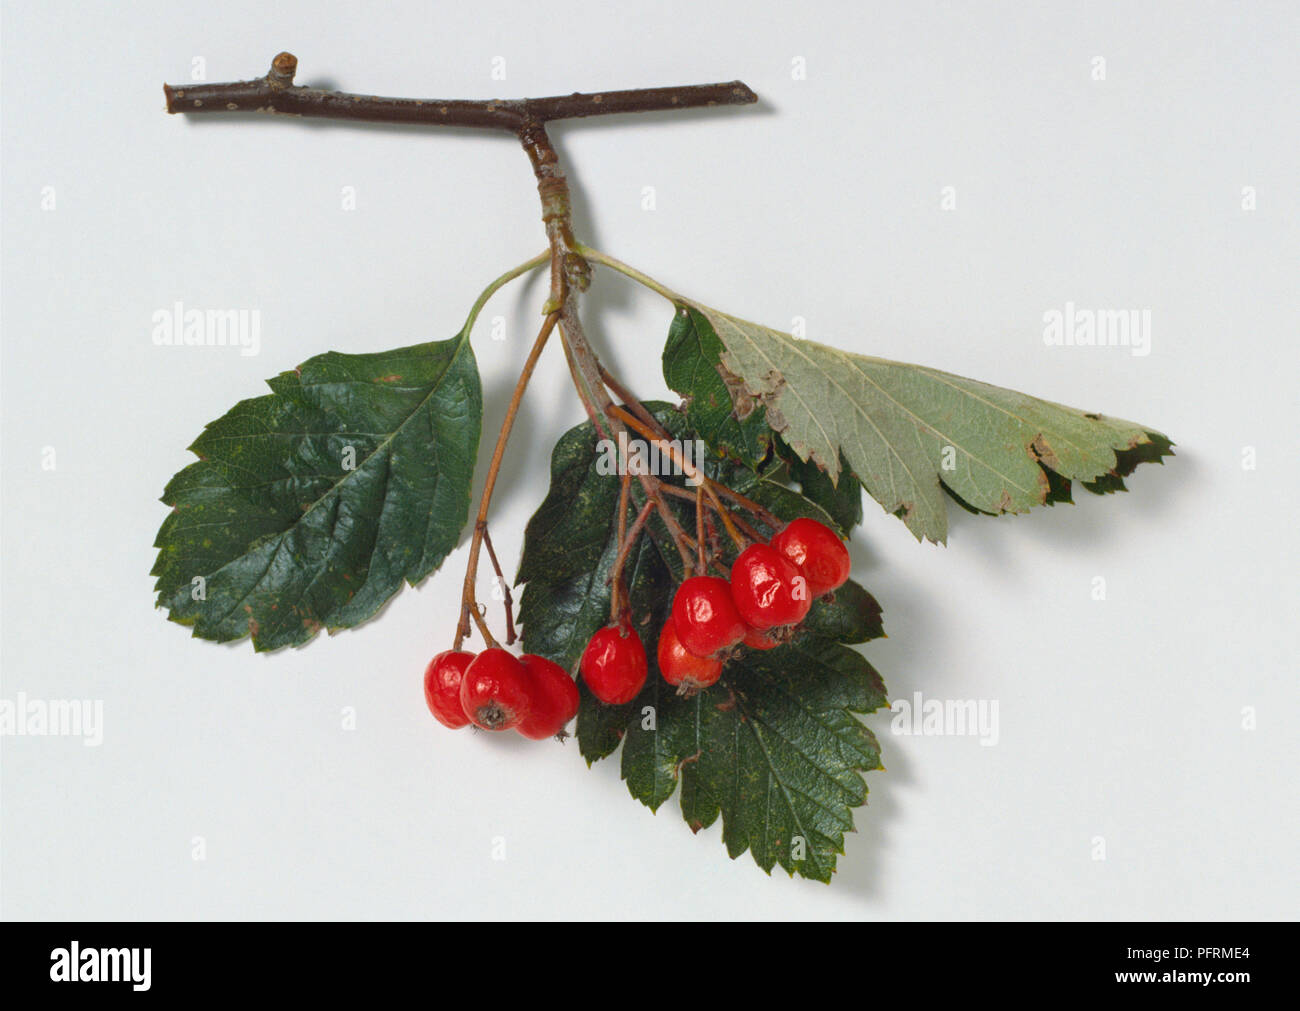 Sorbus intermedia (Swedish whitebeam), stem with leaves and cluster of red fruits Stock Photo